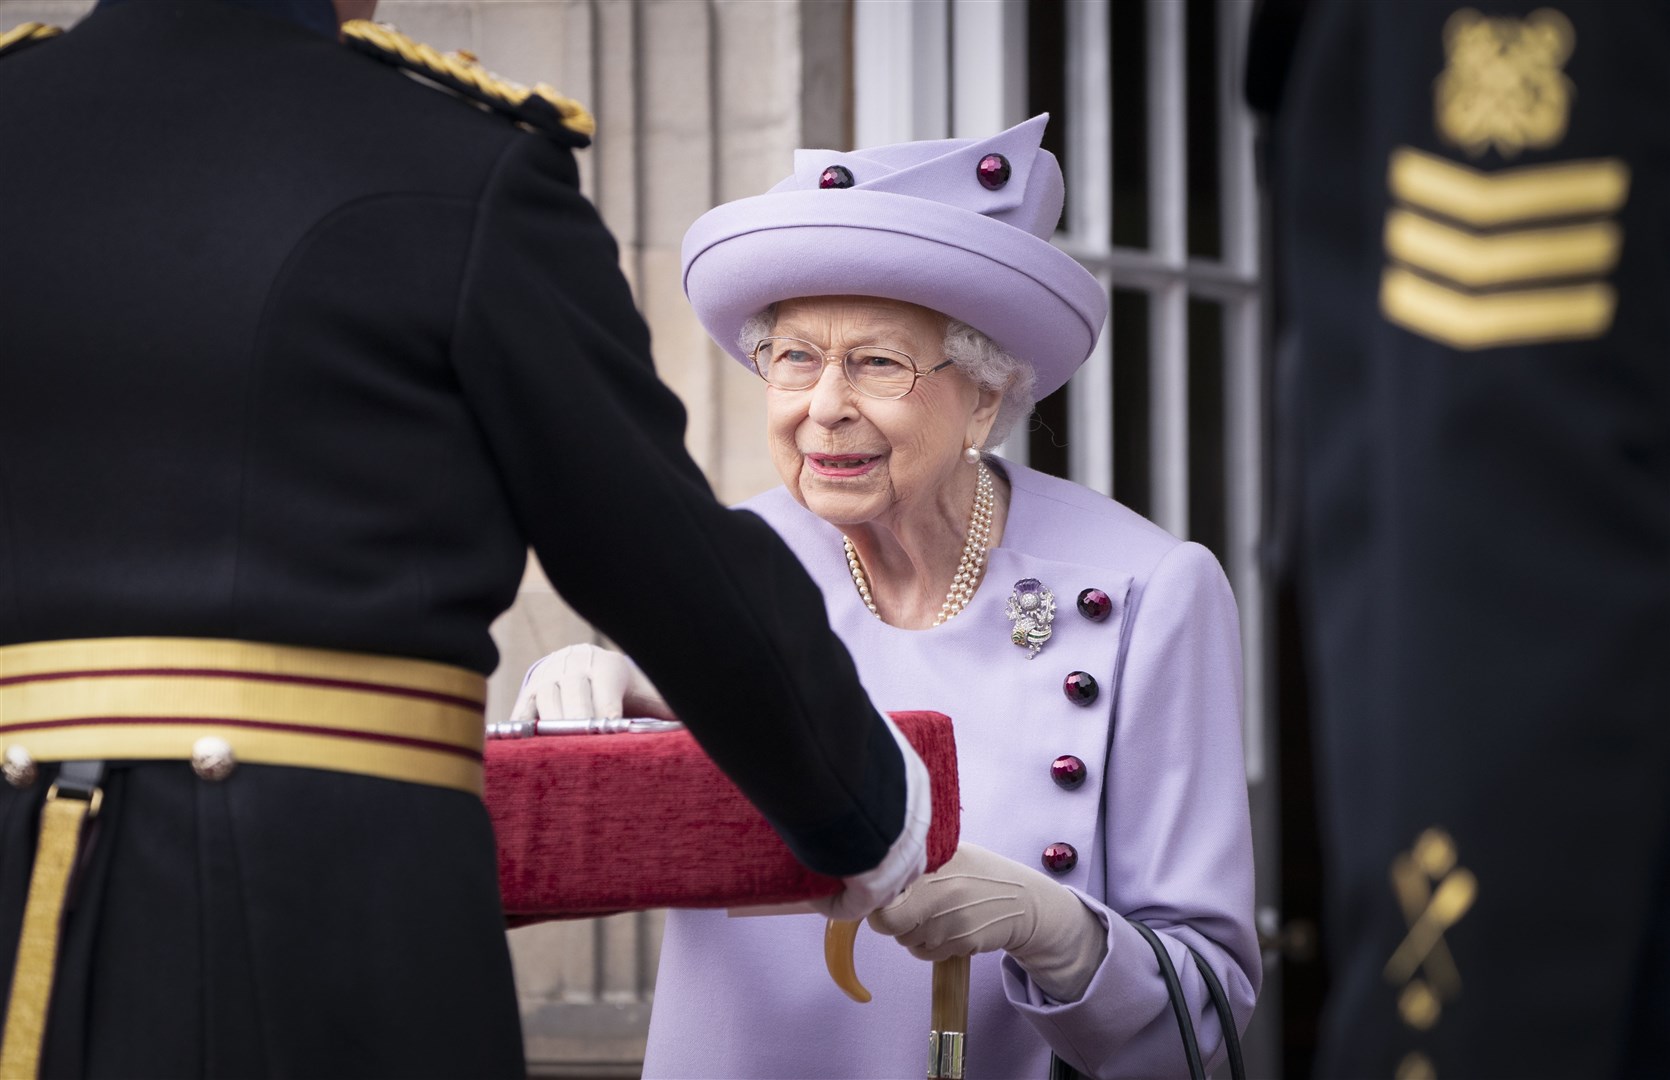 The key to Edinburgh Castle was presented to the Queen at the armed forces act of loyalty parade (Jane Barlow/PA)